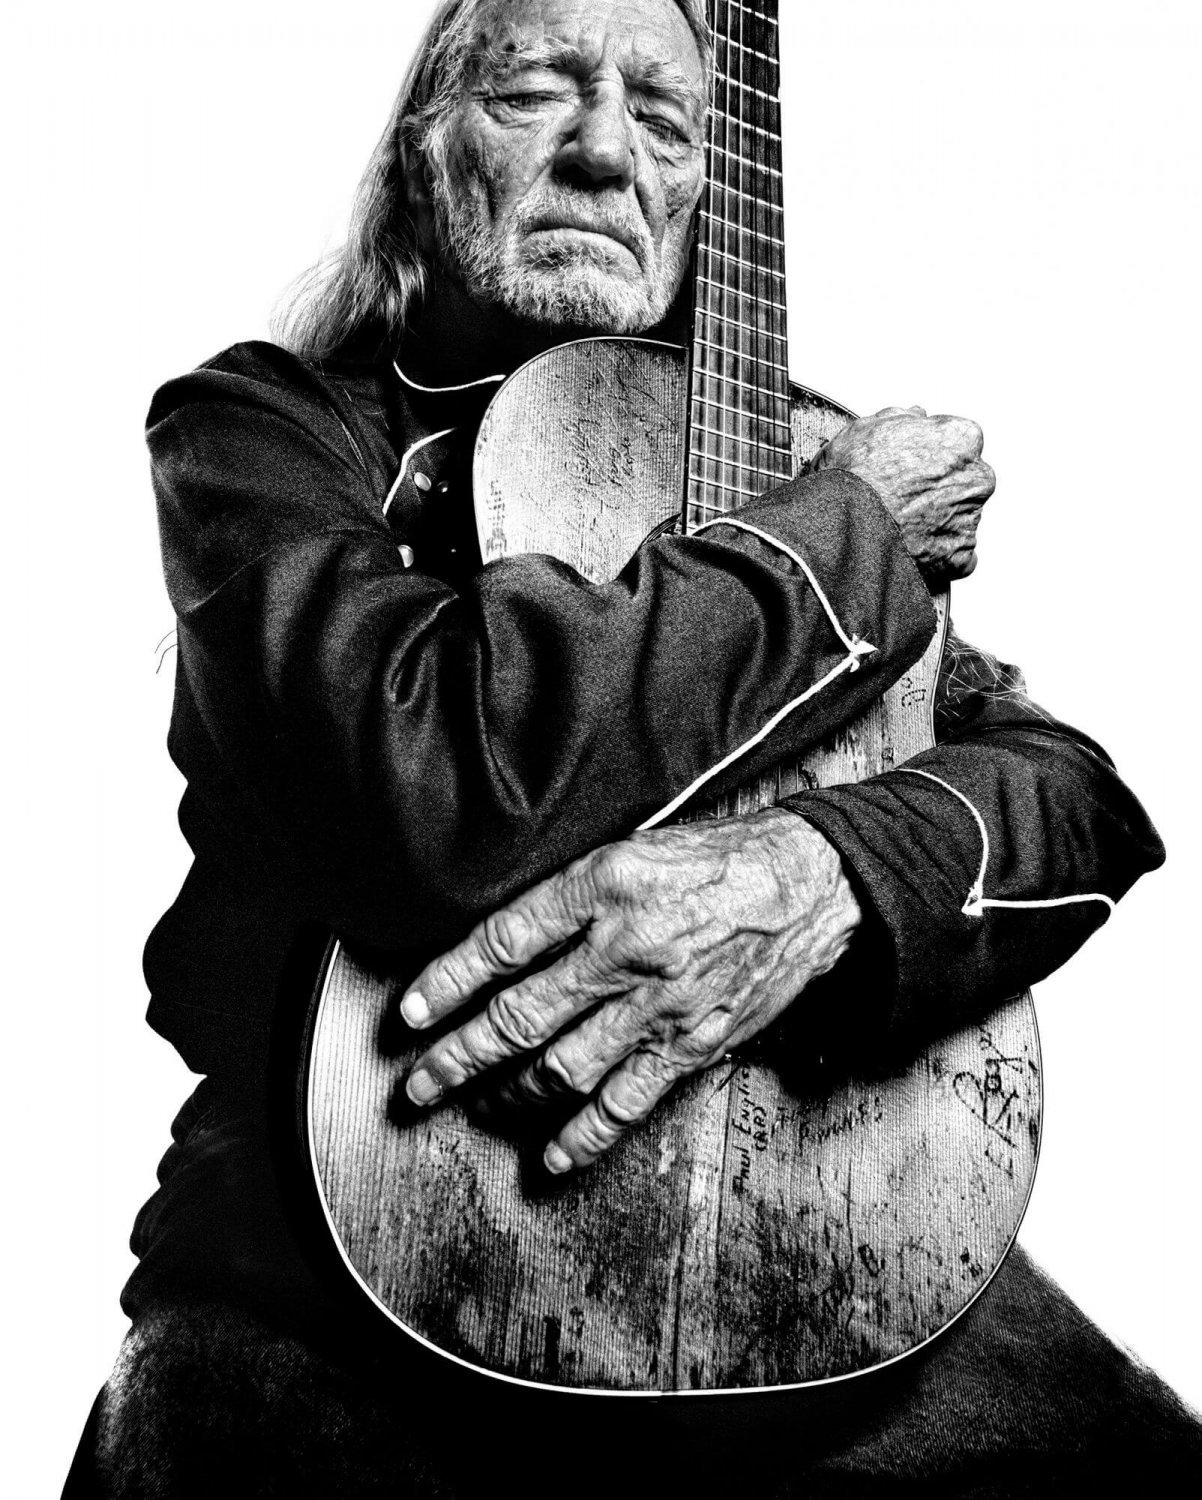 Willie Nelson 13"x19" (32cm/49cm) Polyester Fabric Poster